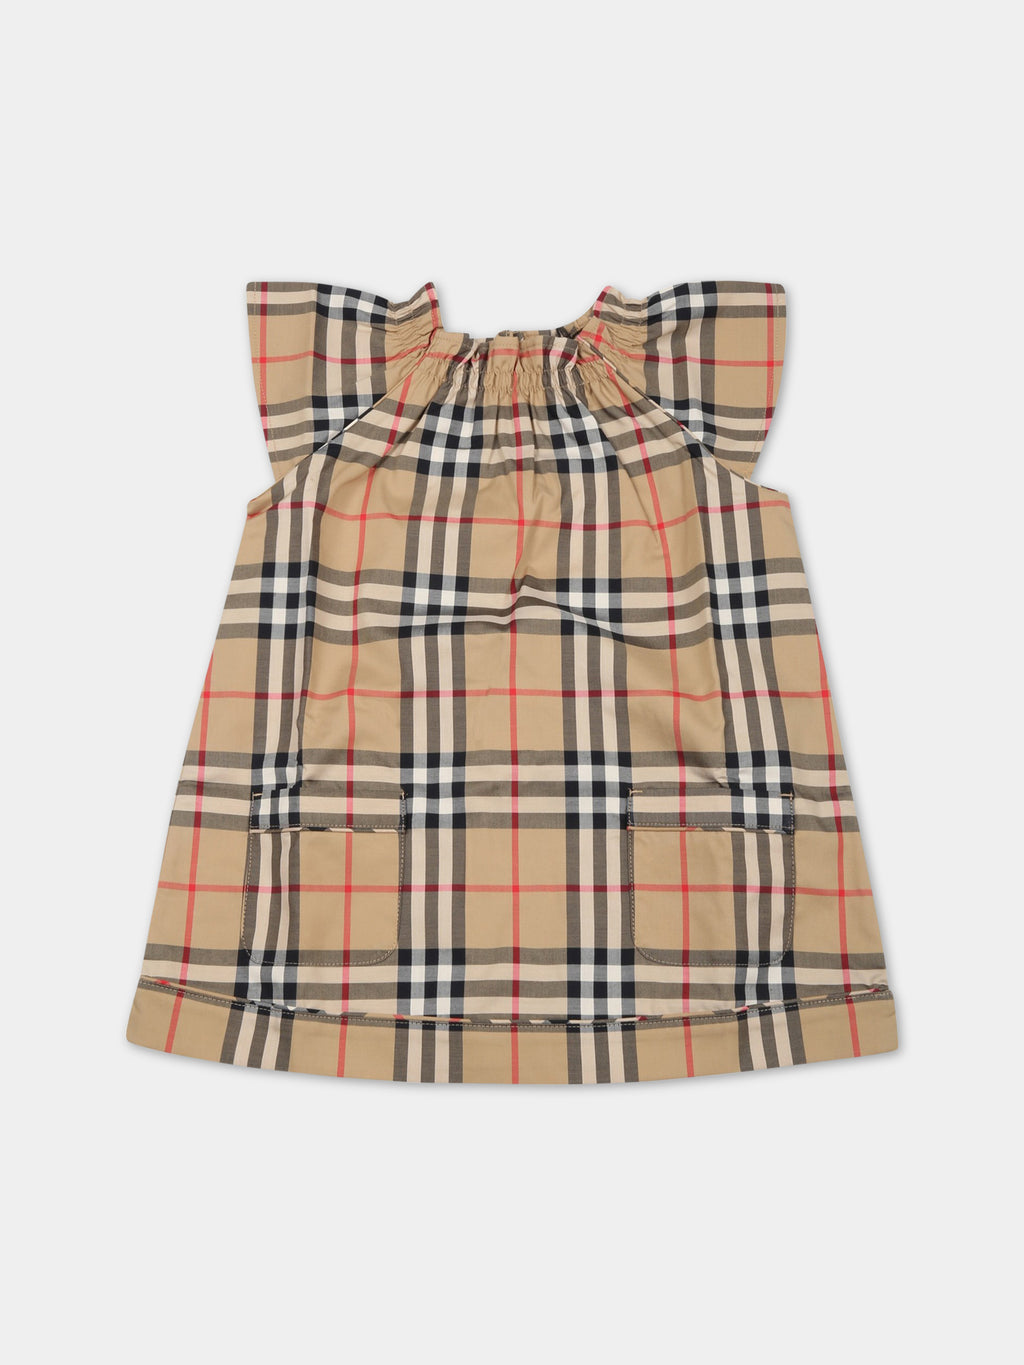 Beige dress for baby girl with vintage check